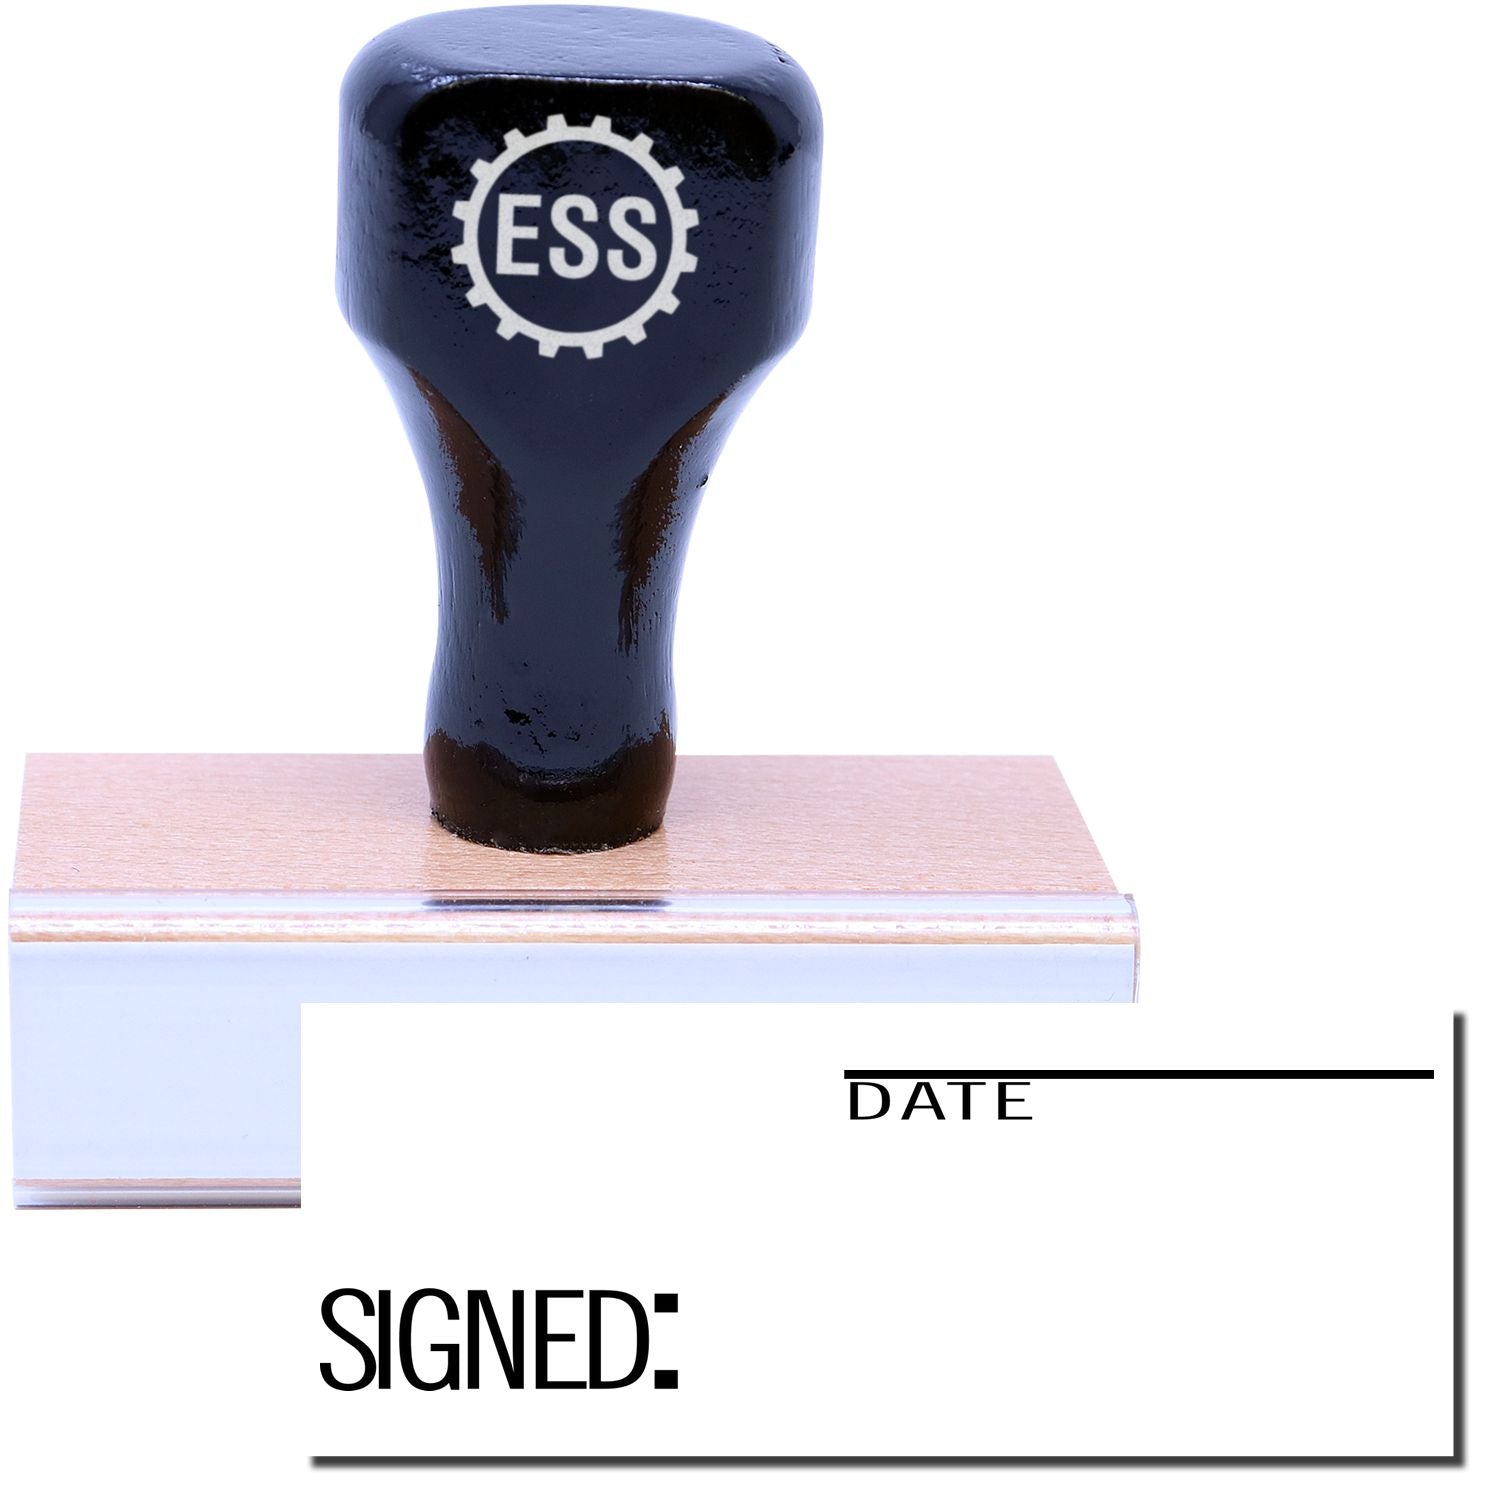 A stock office rubber stamp with a stamped image showing how the text "SIGNED:" (on the left bottom side) and "DATE" (on the right top side with a line above it) in a large font is displayed after stamping.